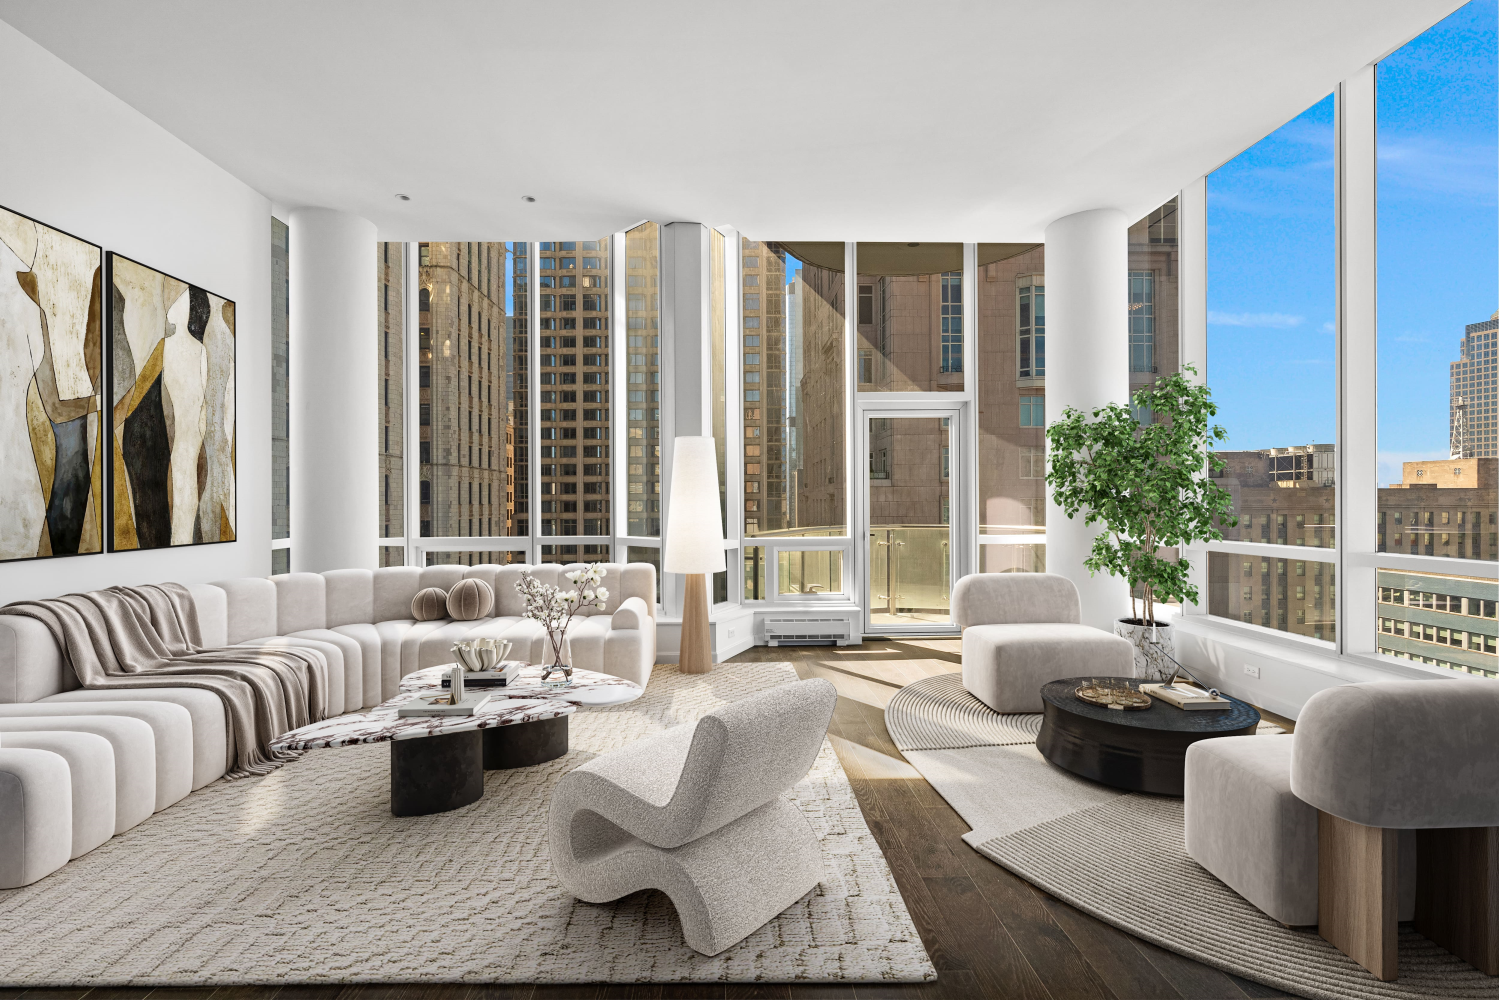 19 Park Place Ph, Tribeca, Downtown, NYC - 3 Bedrooms  
3.5 Bathrooms  
7 Rooms - 